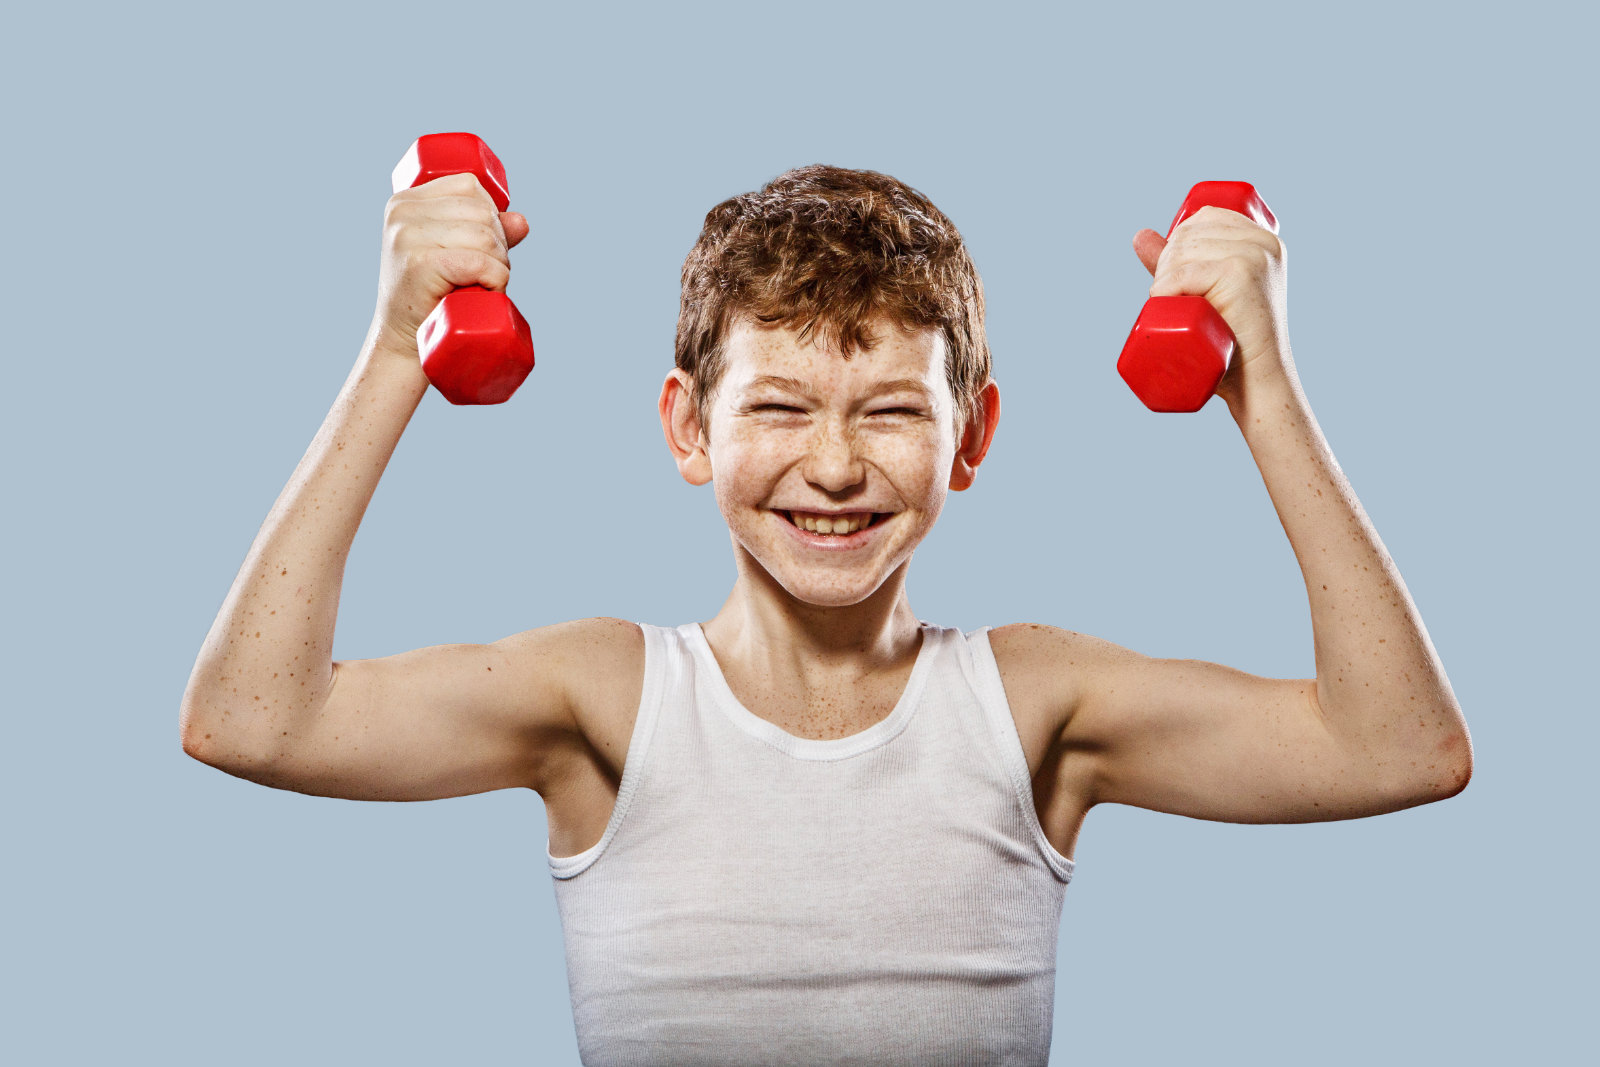 Boy exercising with dumbells